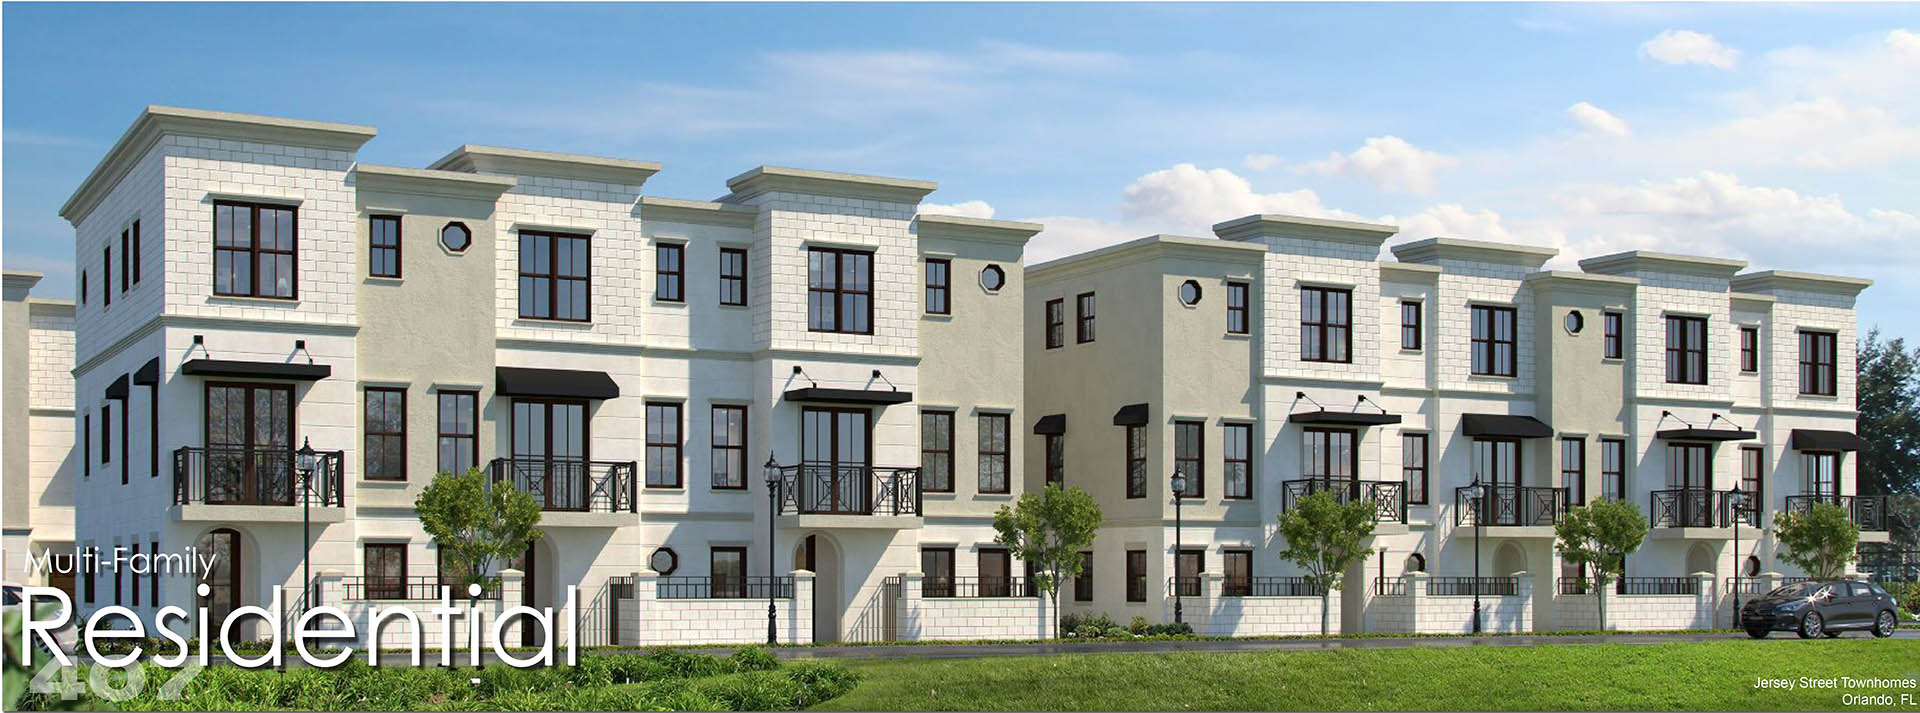 picture of a multifamily townhome complex: Jersey Street Townhomes